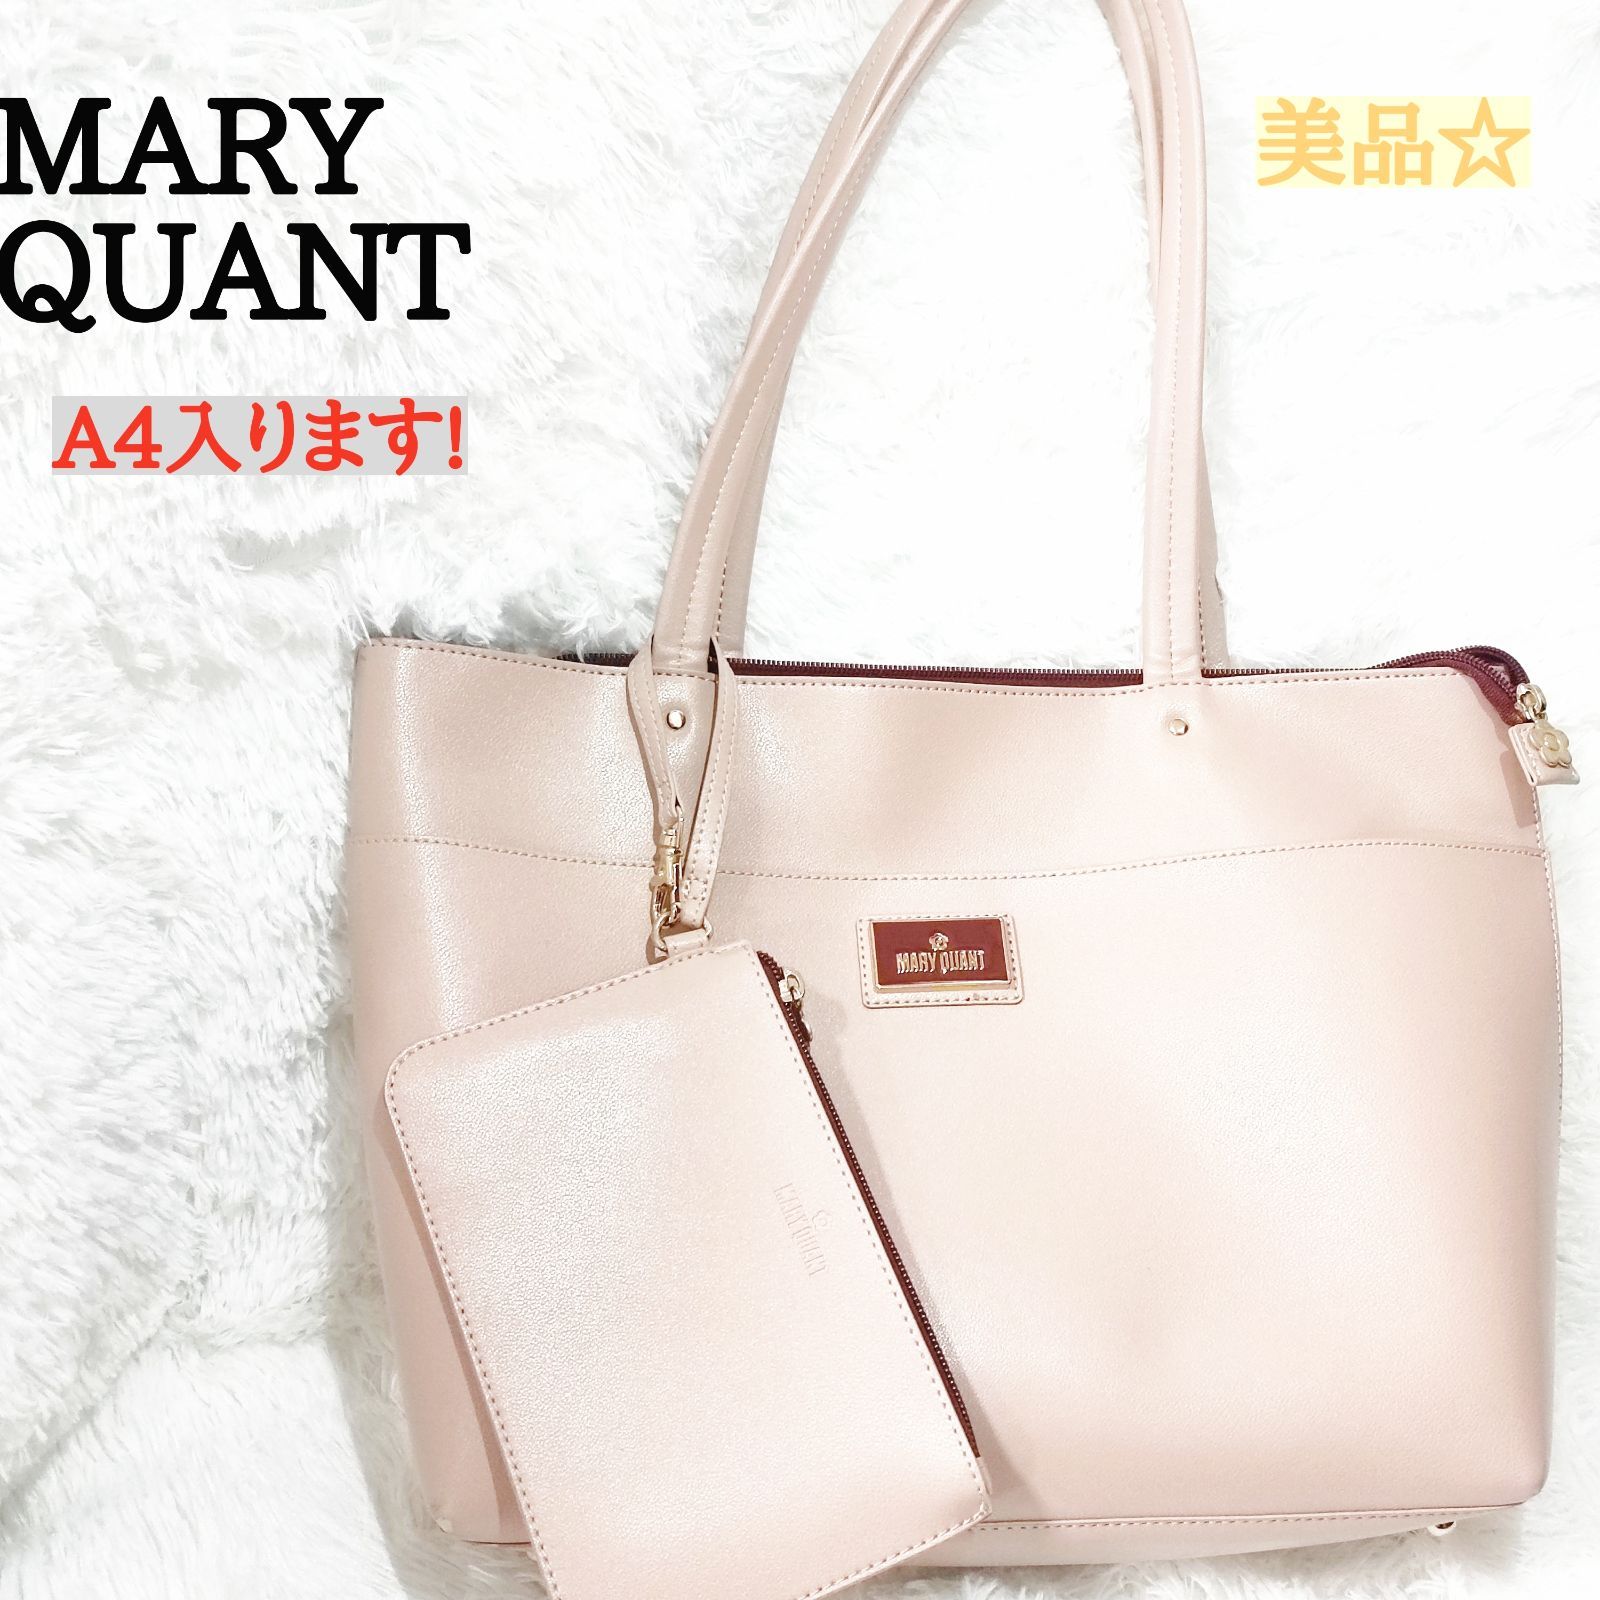 MARY QUANT　 A4トートバッグ　マリークワント　美品　送料無料